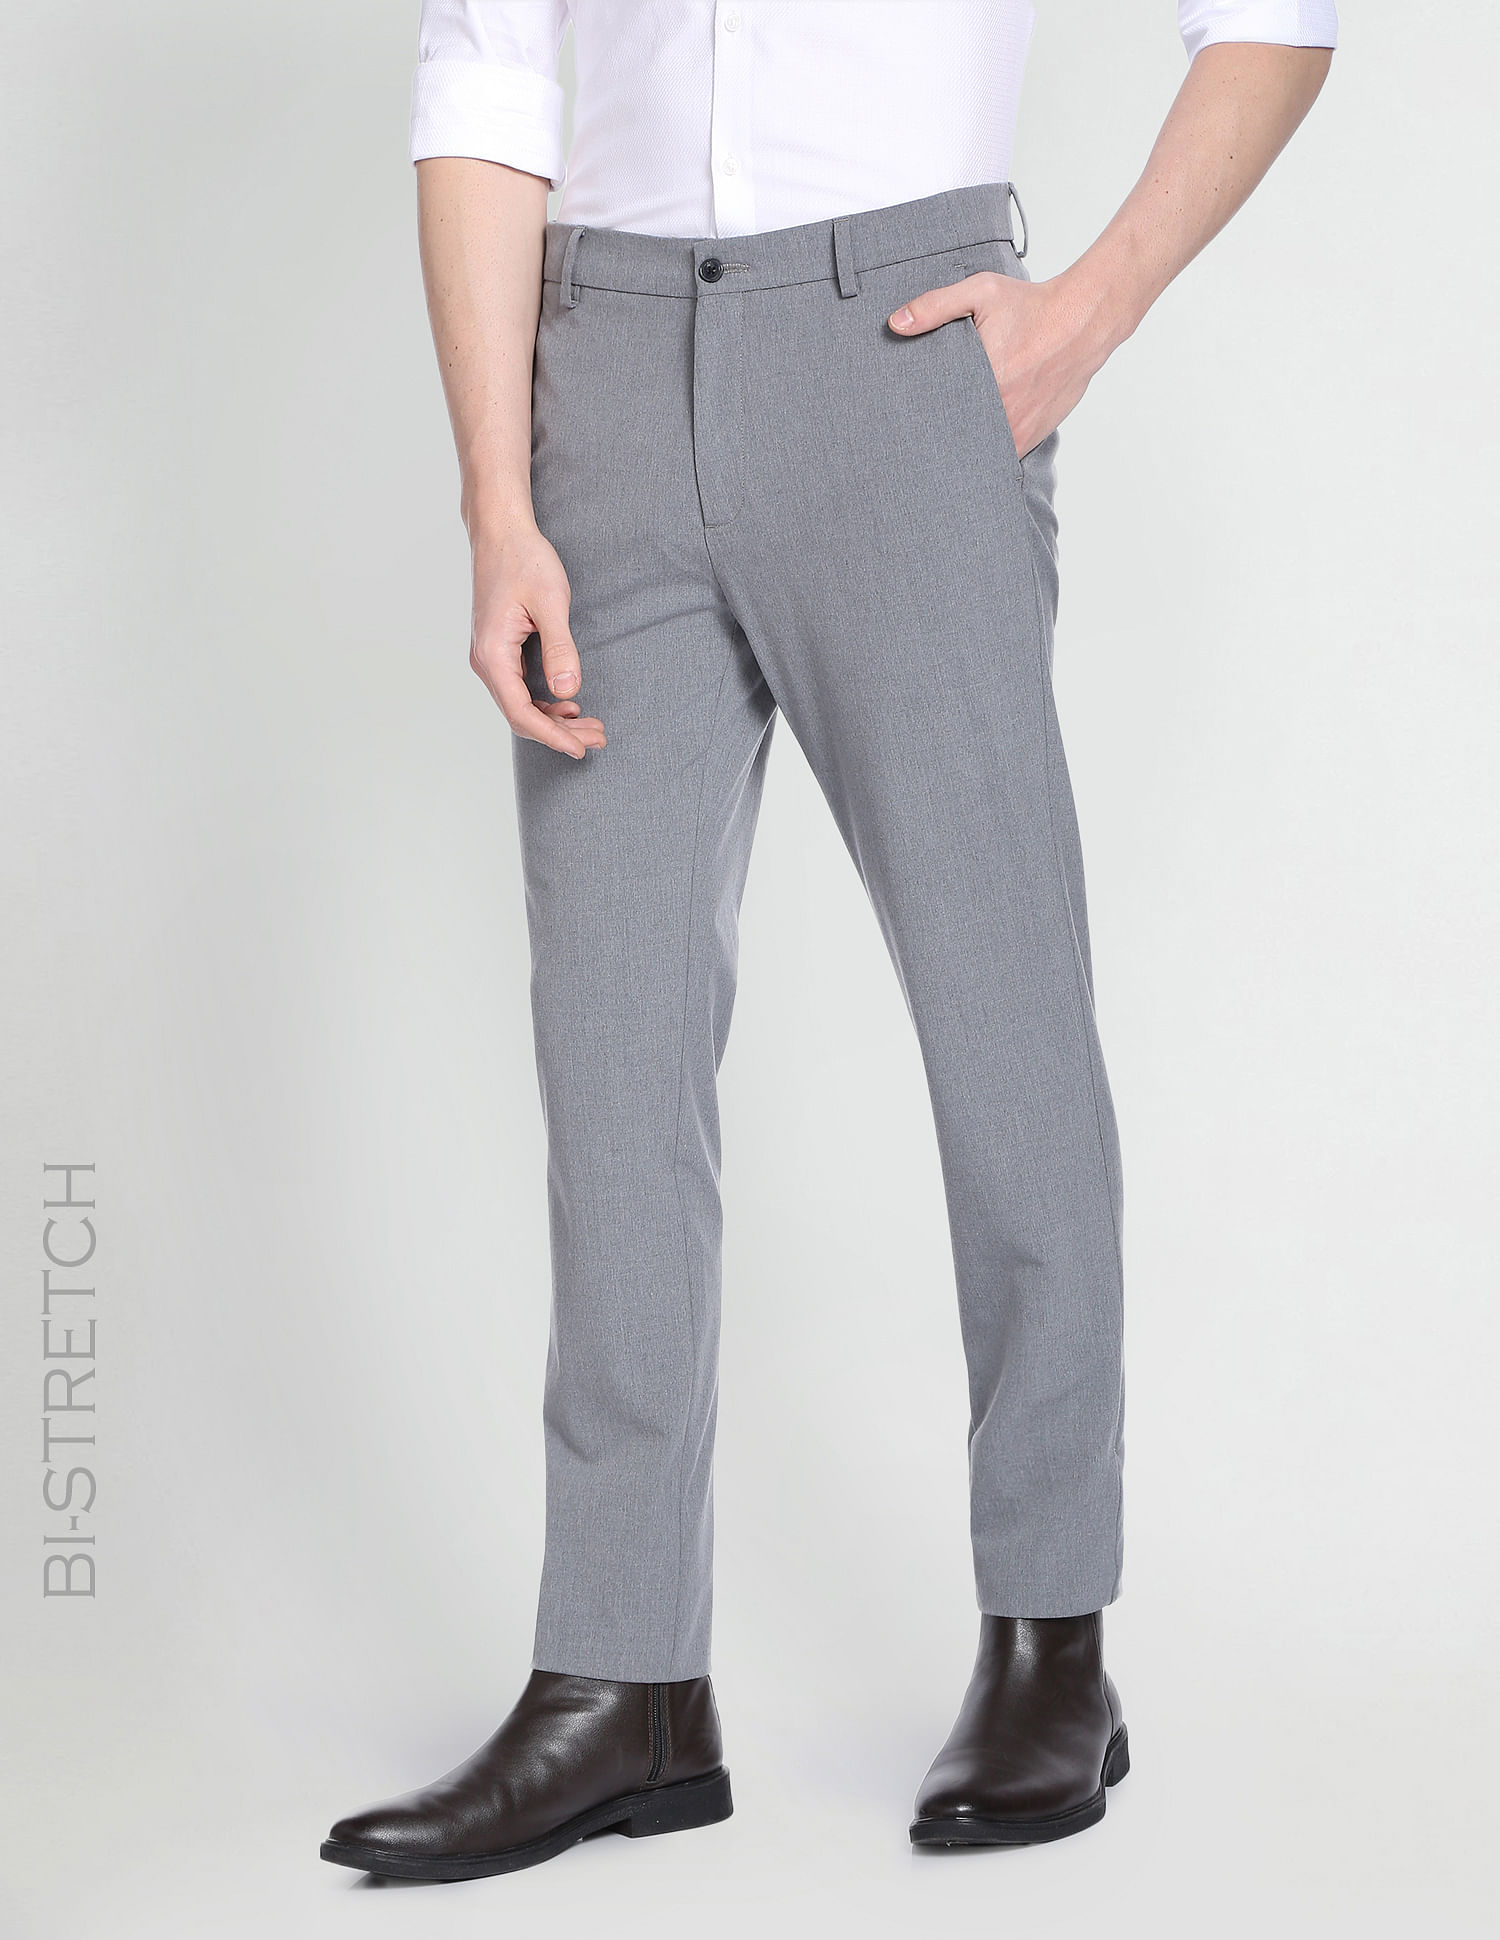 Browse And Shop Men's Formal Pants | Woolworths.co.za-mncb.edu.vn